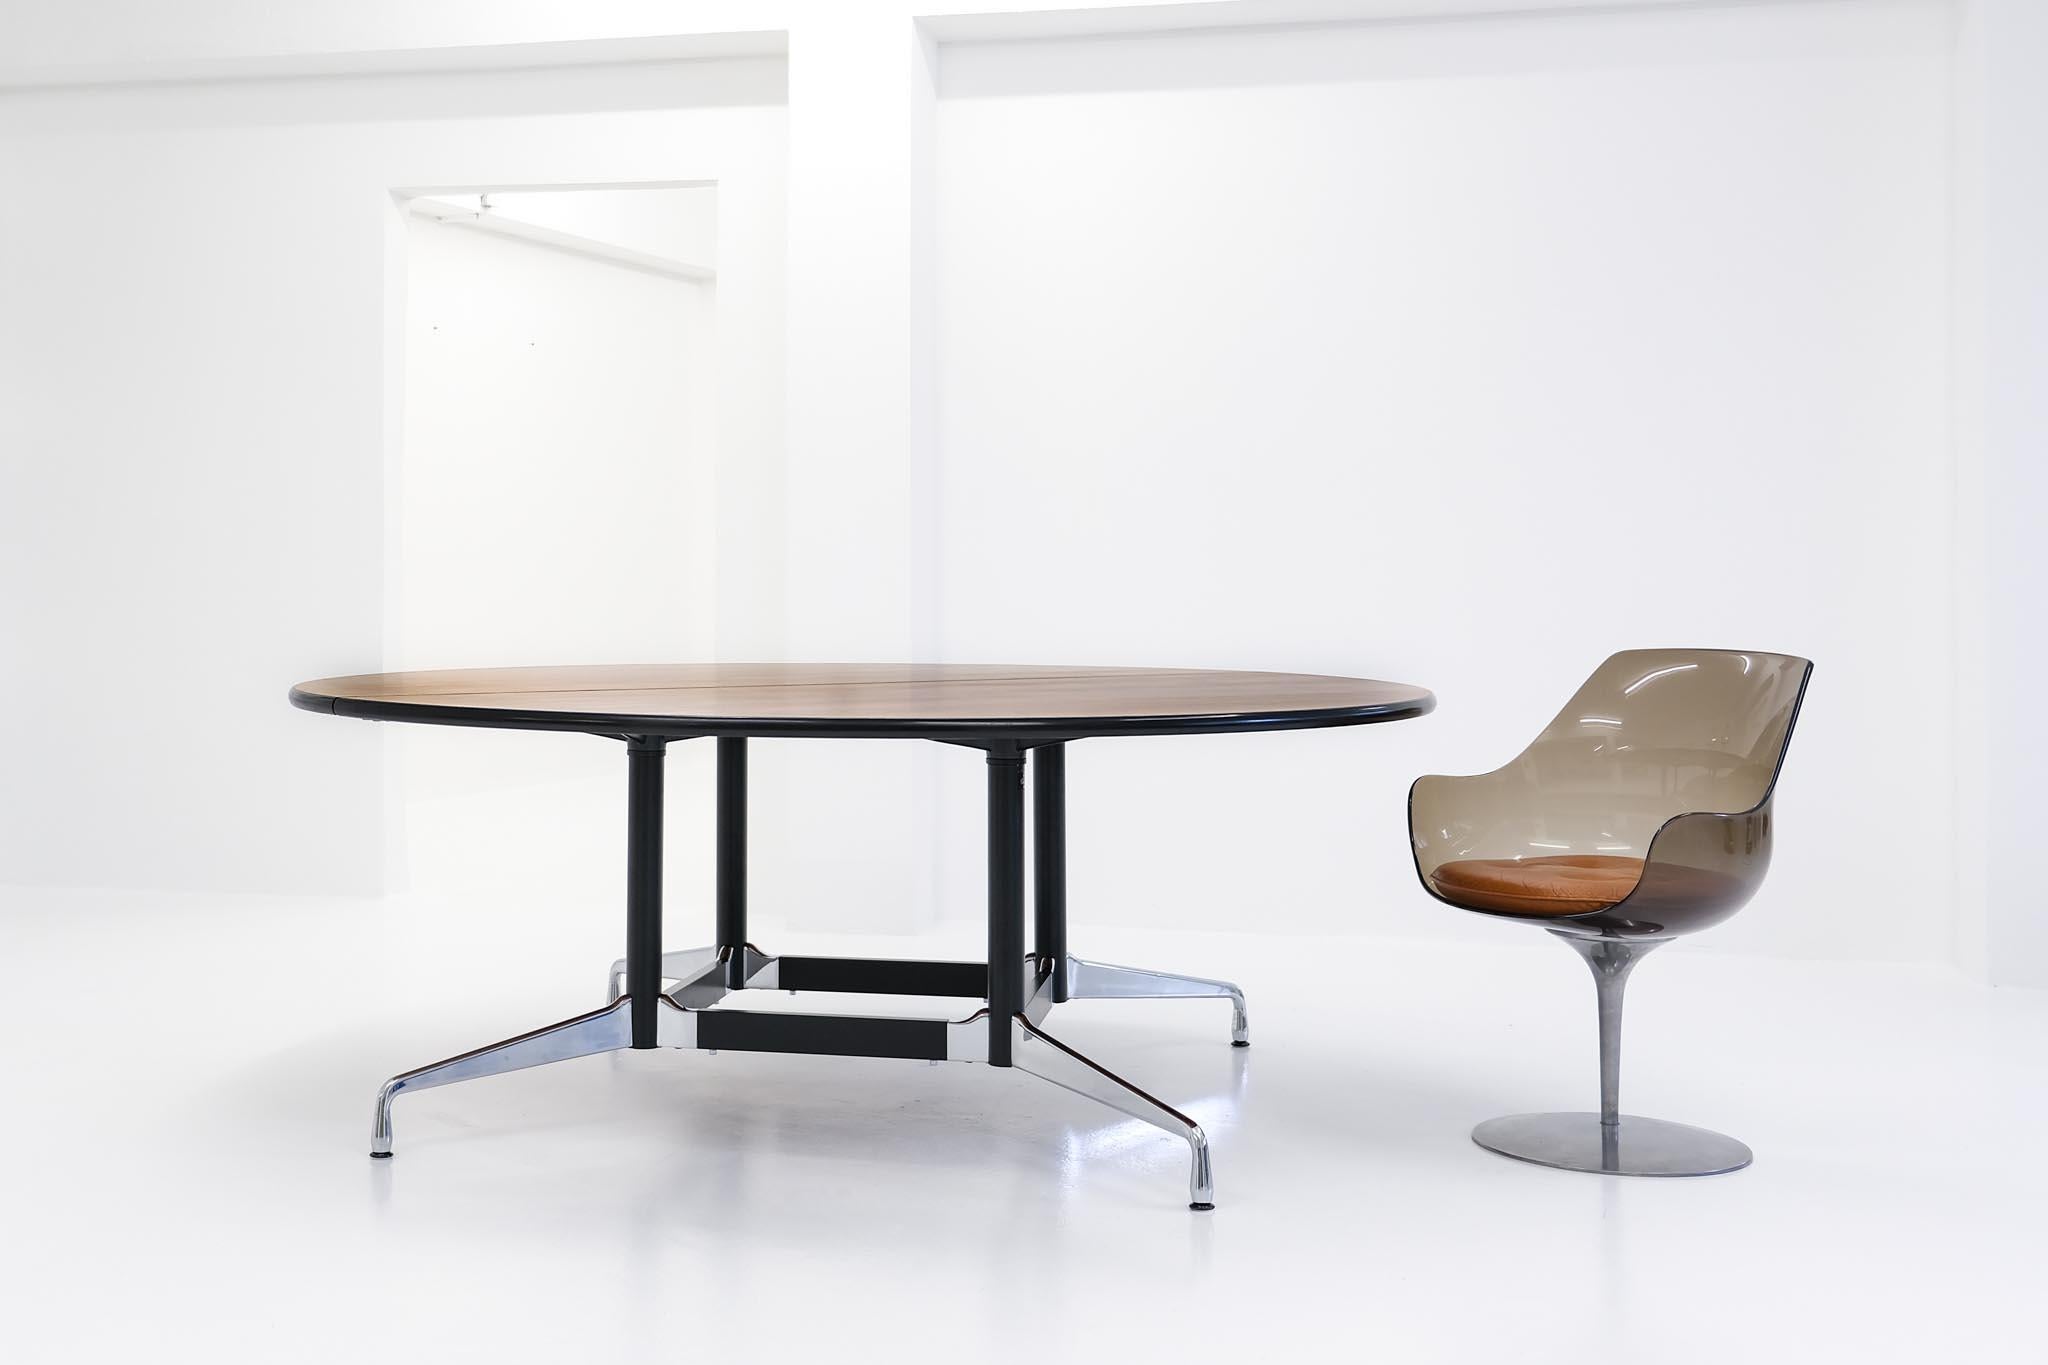 Steel Segmented Table with Brazilian Rosewood Top by Ray and Charles Eames, 1970s